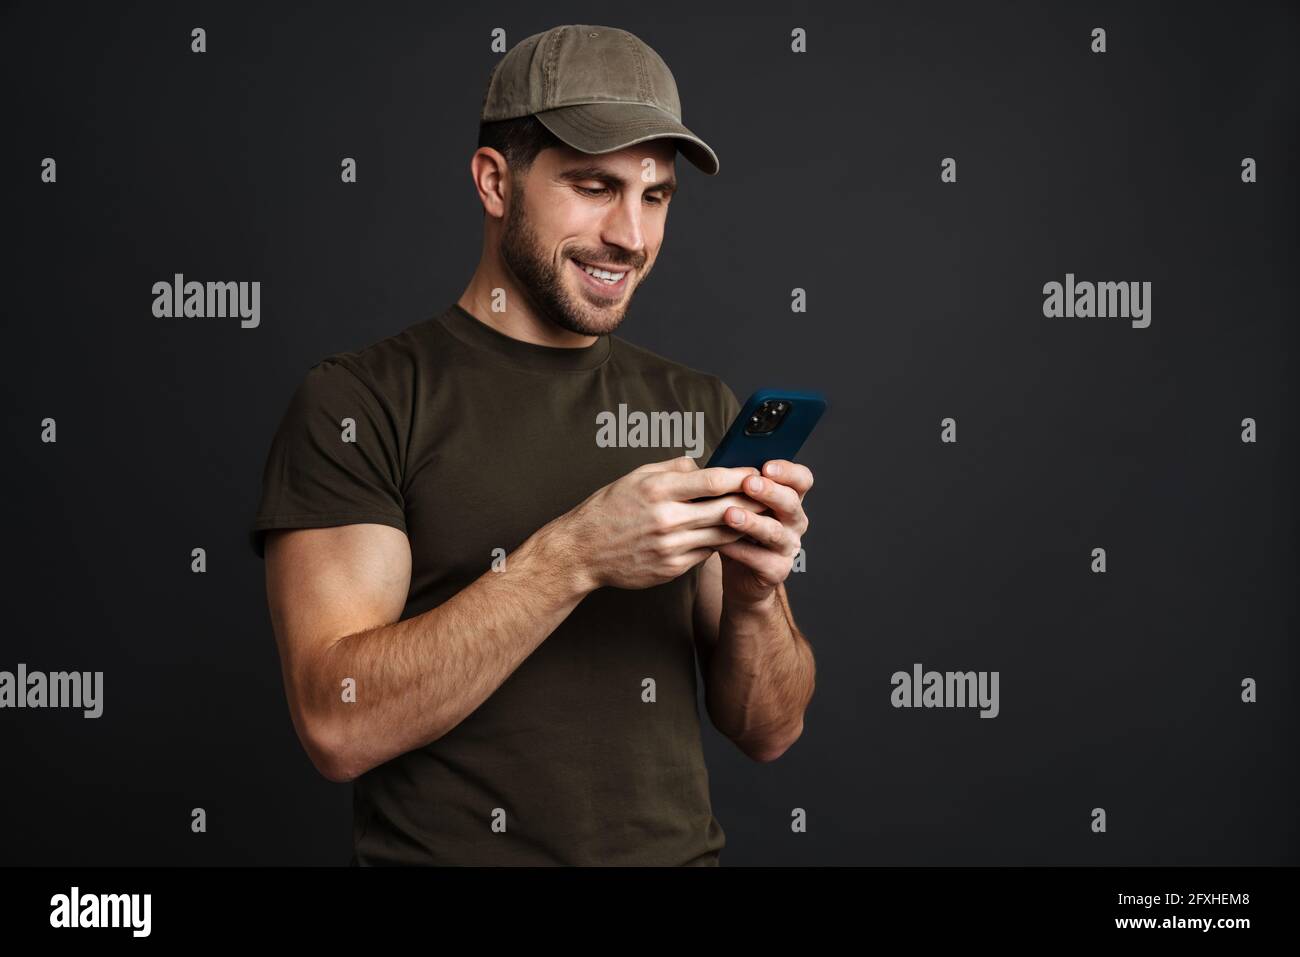 Happy masculine military man smiling and using mobile phone isolated over black background Stock Photo